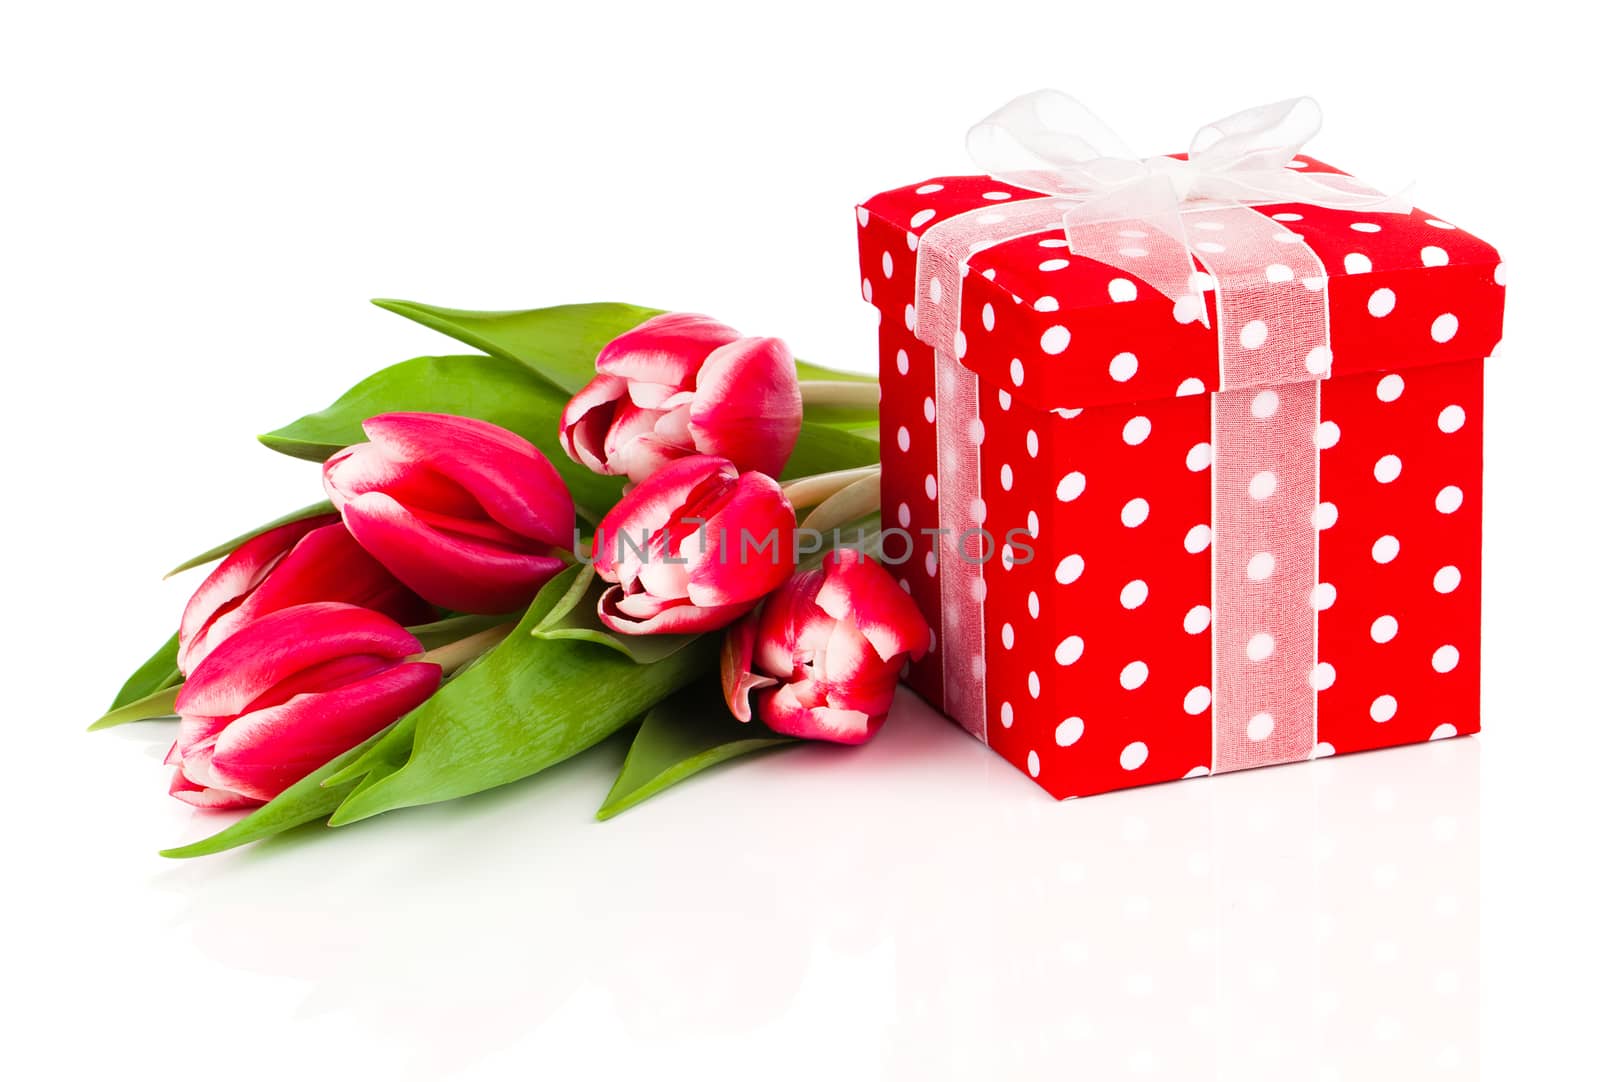 beautiful tulips with red polka-dot gift box. happy mothers day, romantic still life, fresh flowers